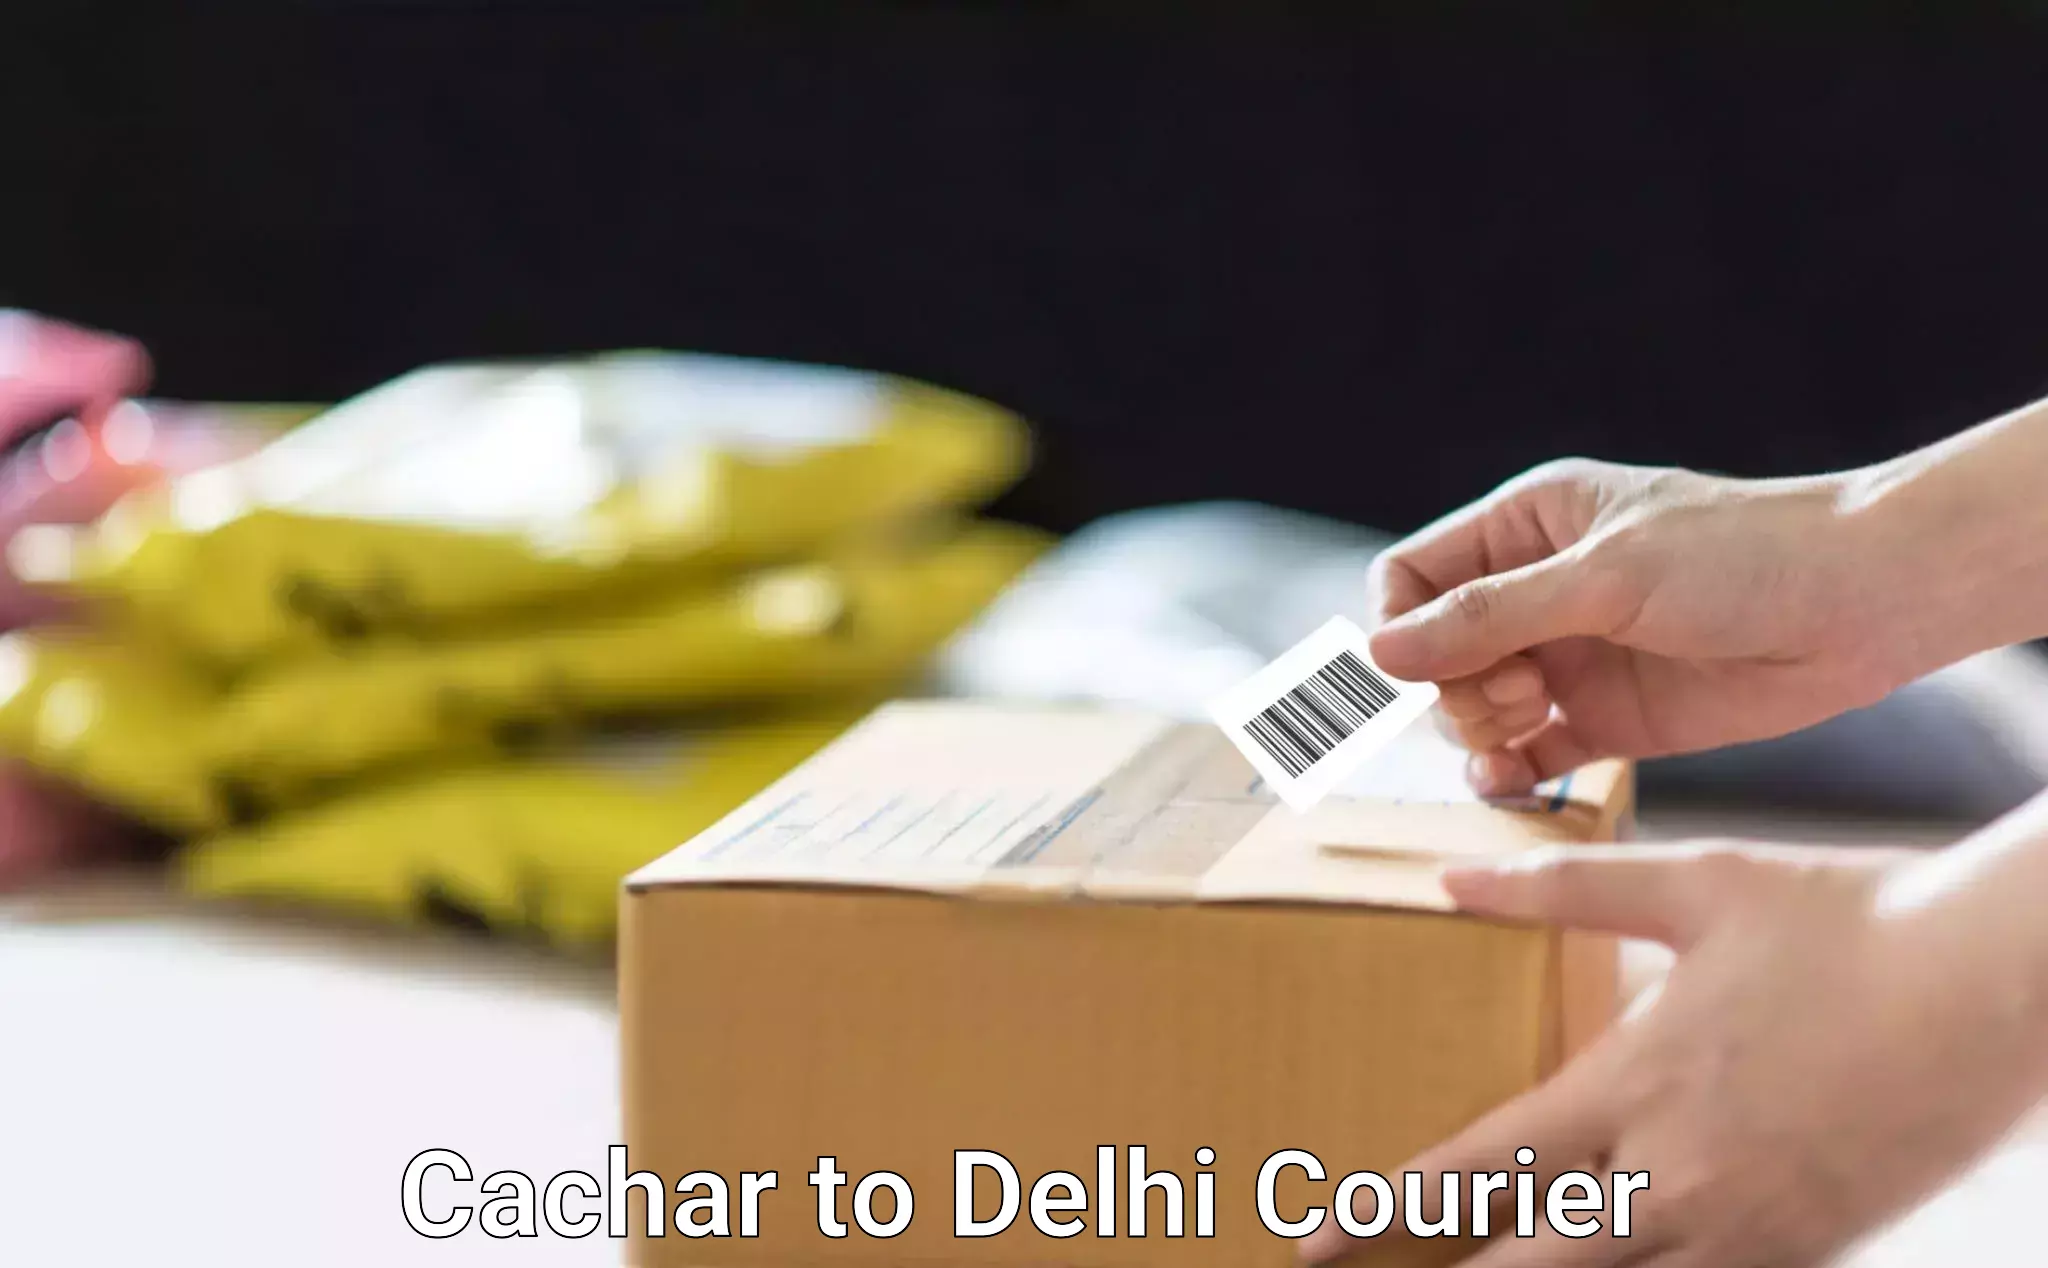 Budget-friendly shipping in Cachar to NCR